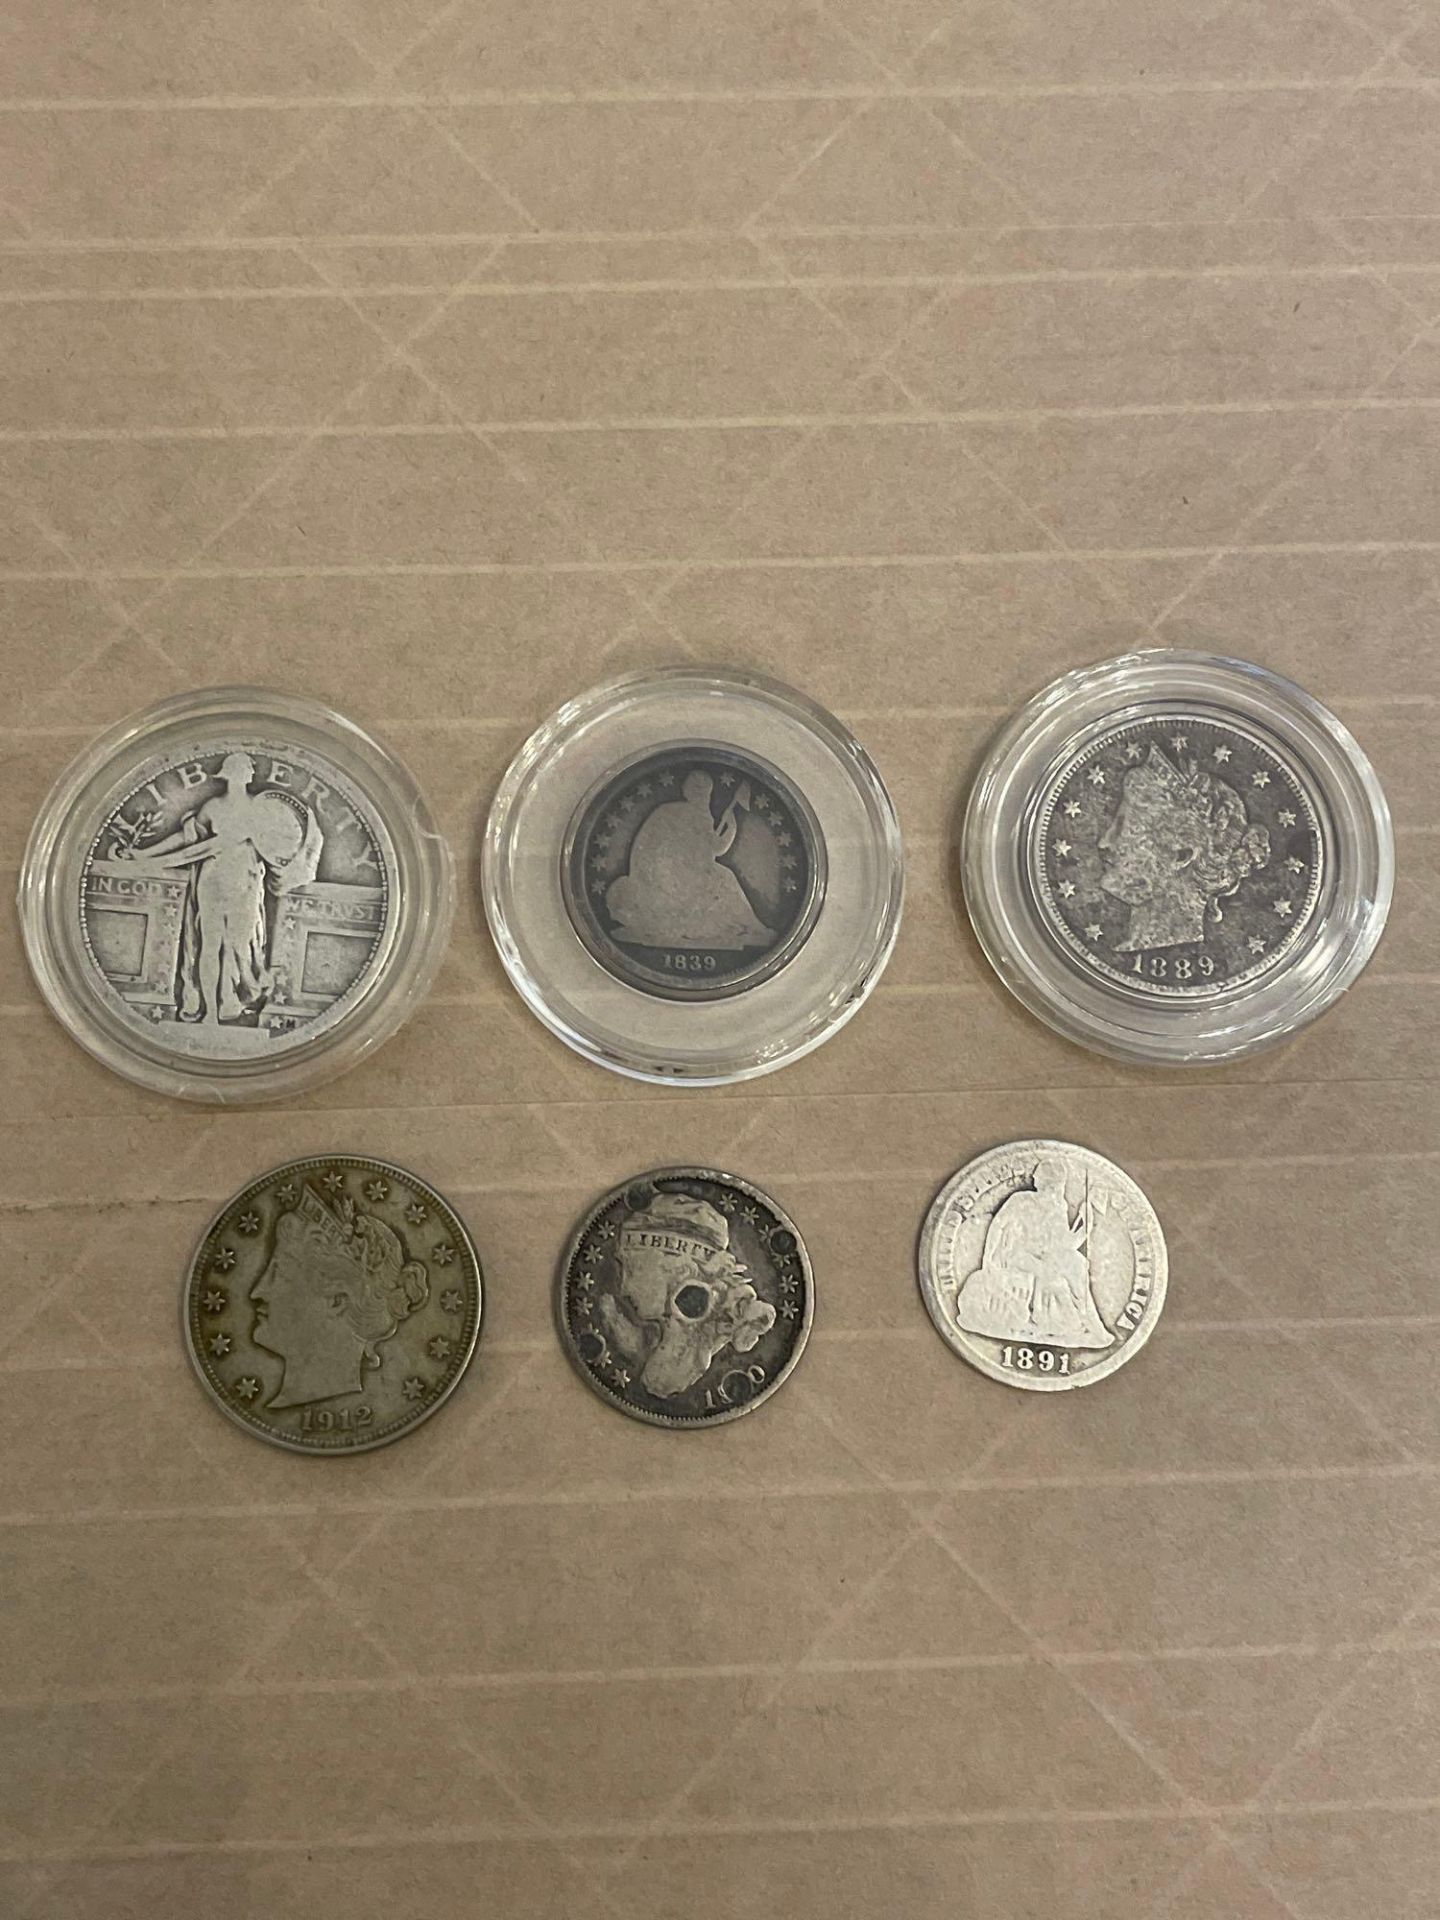 1839 Seated Liberty Dime, V Nickels and more